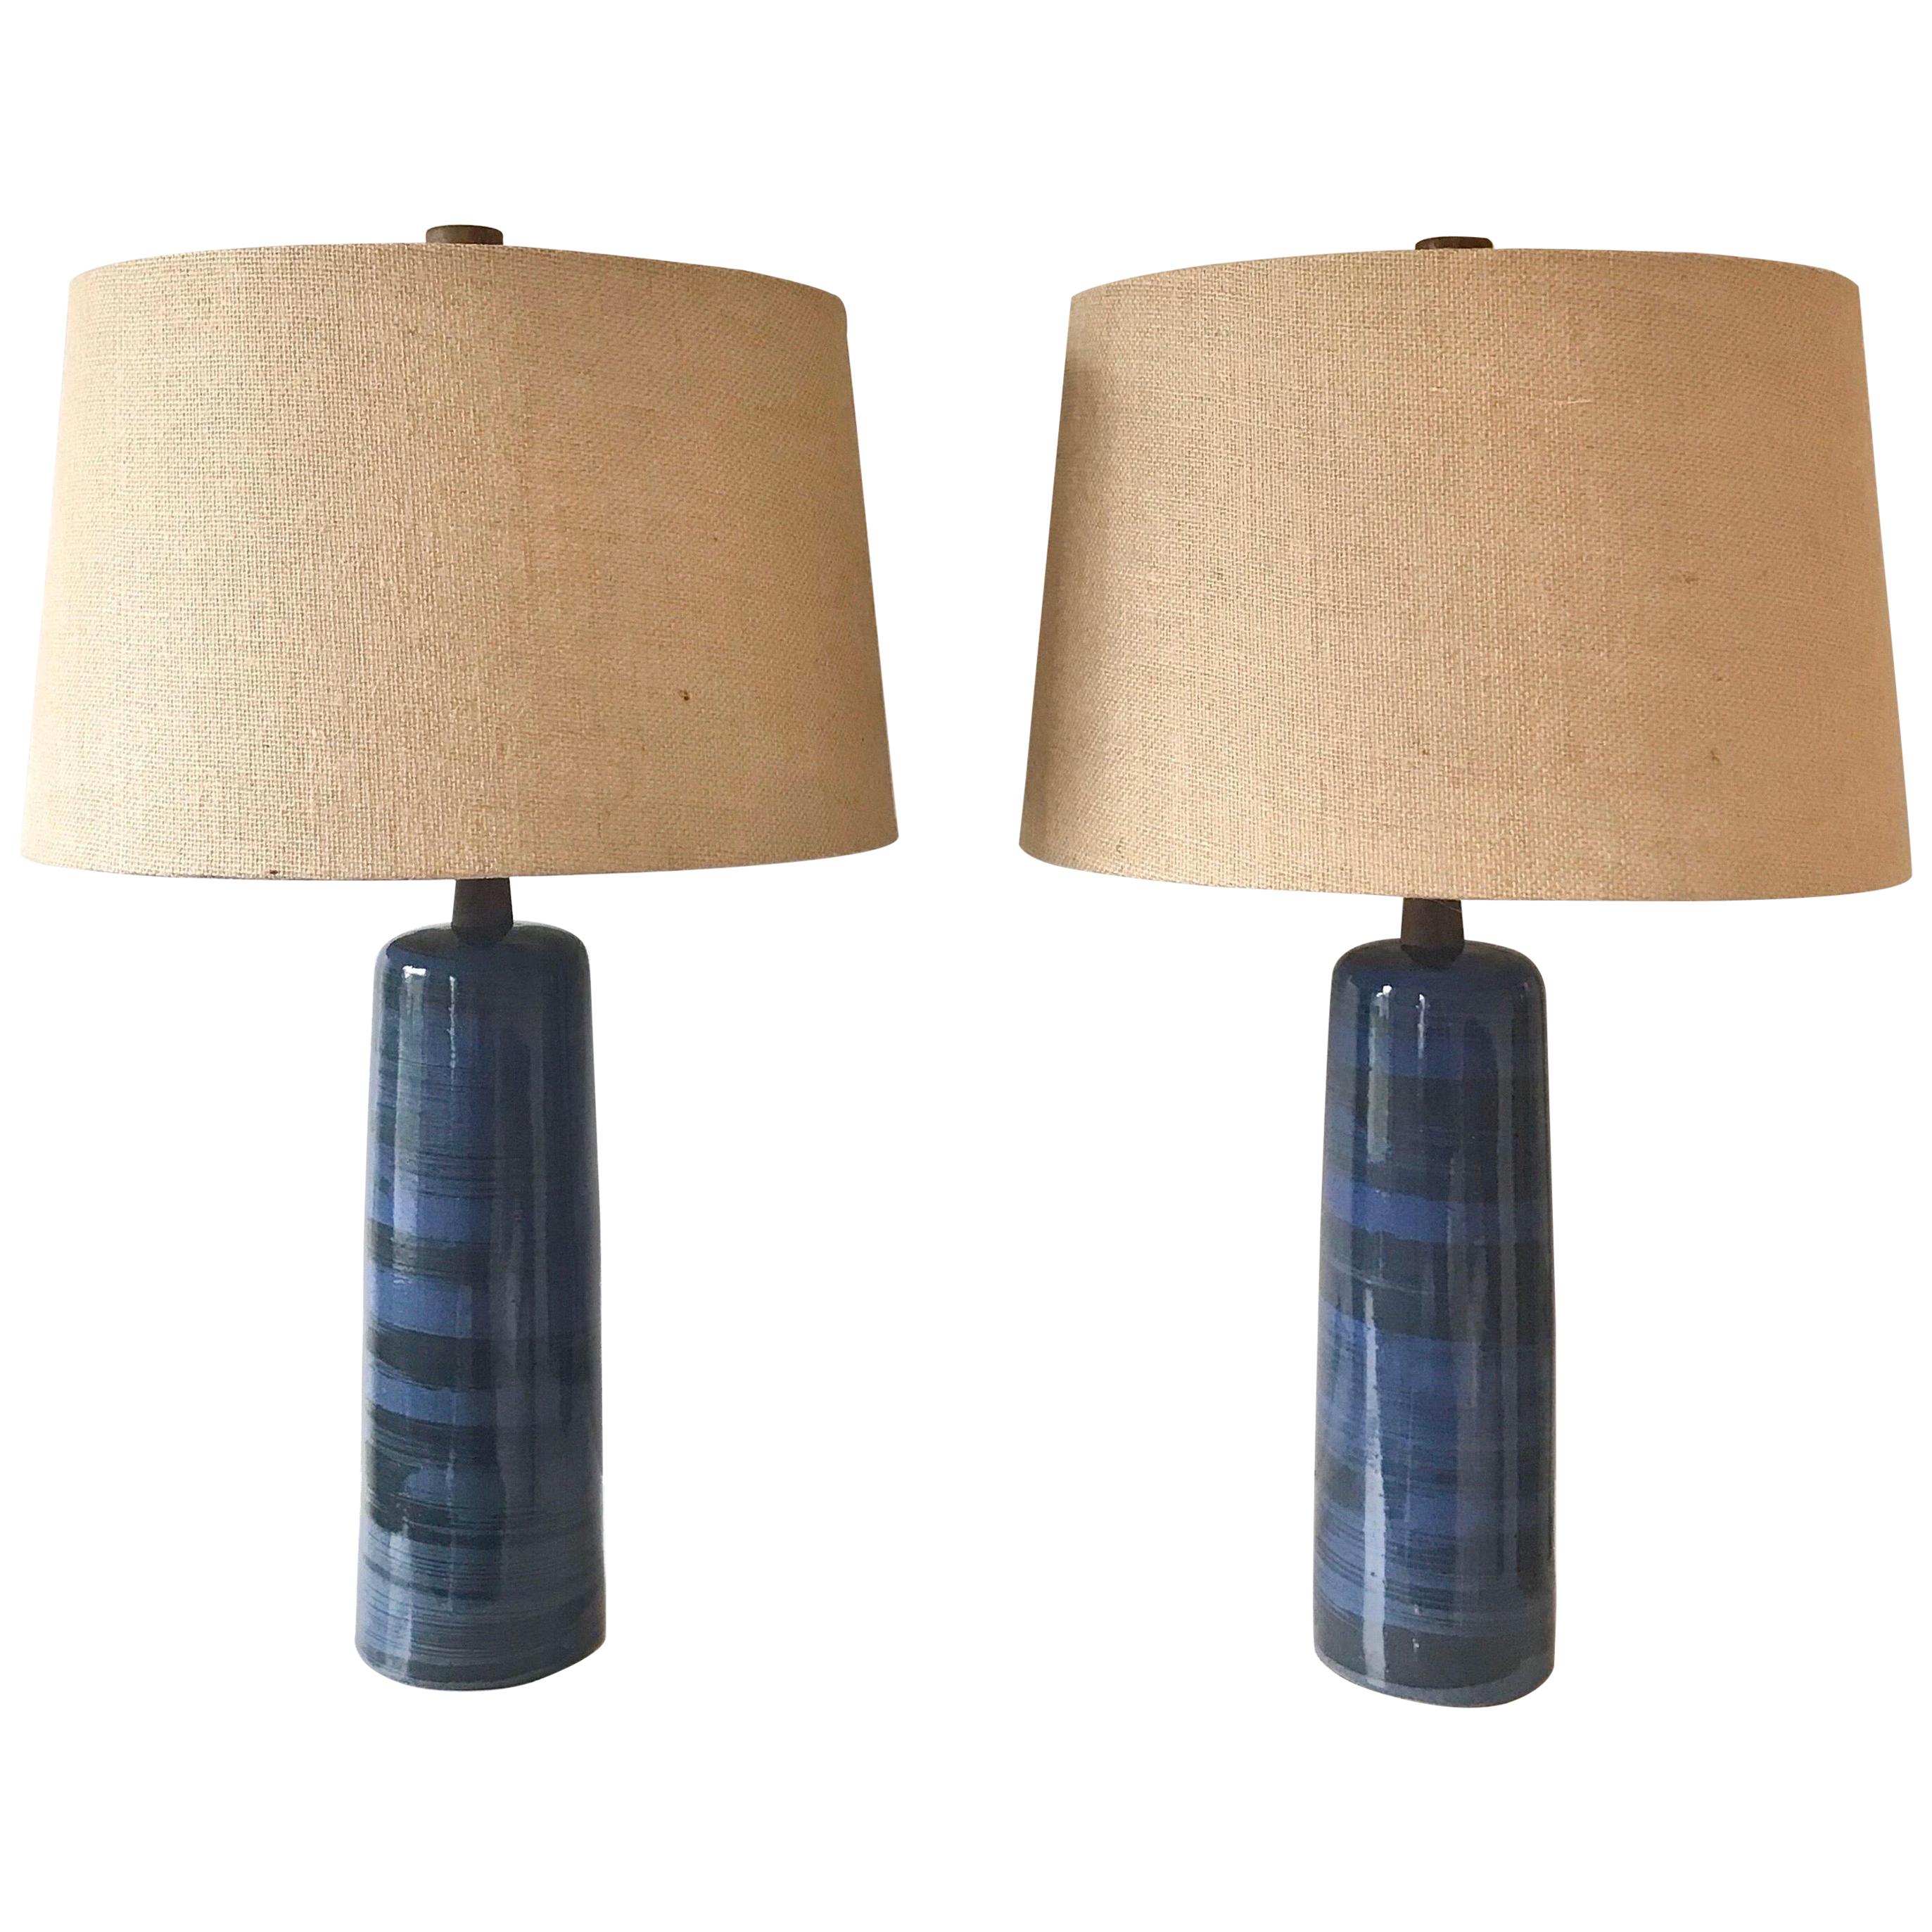 Jane and Gordon Martz for Marshall Studio Pair of Large Lamps, Blue and Black